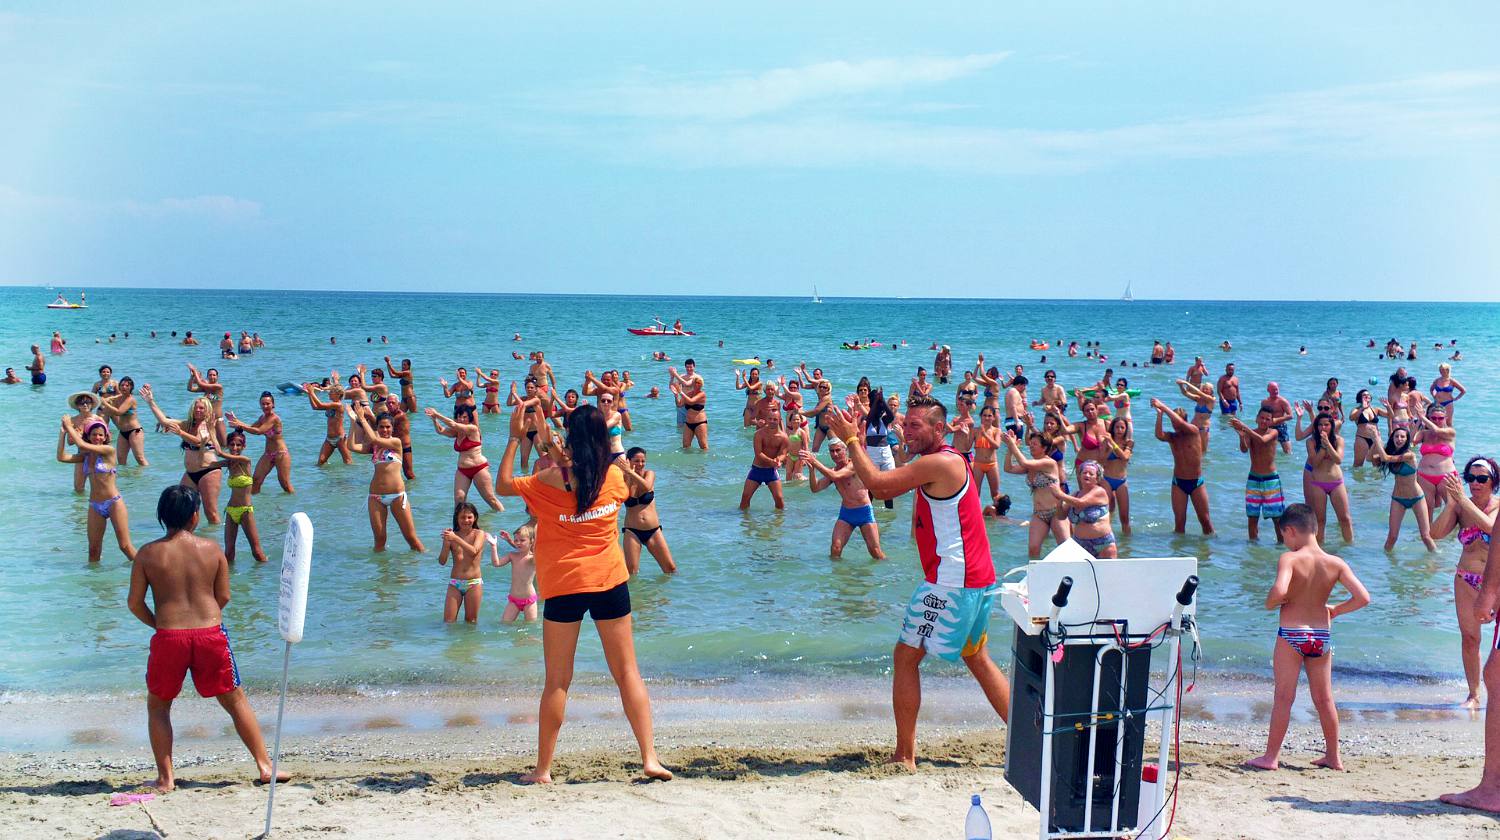 Feature | A group of people dancing at the beach | Fun Summer Activities You Can DIY!